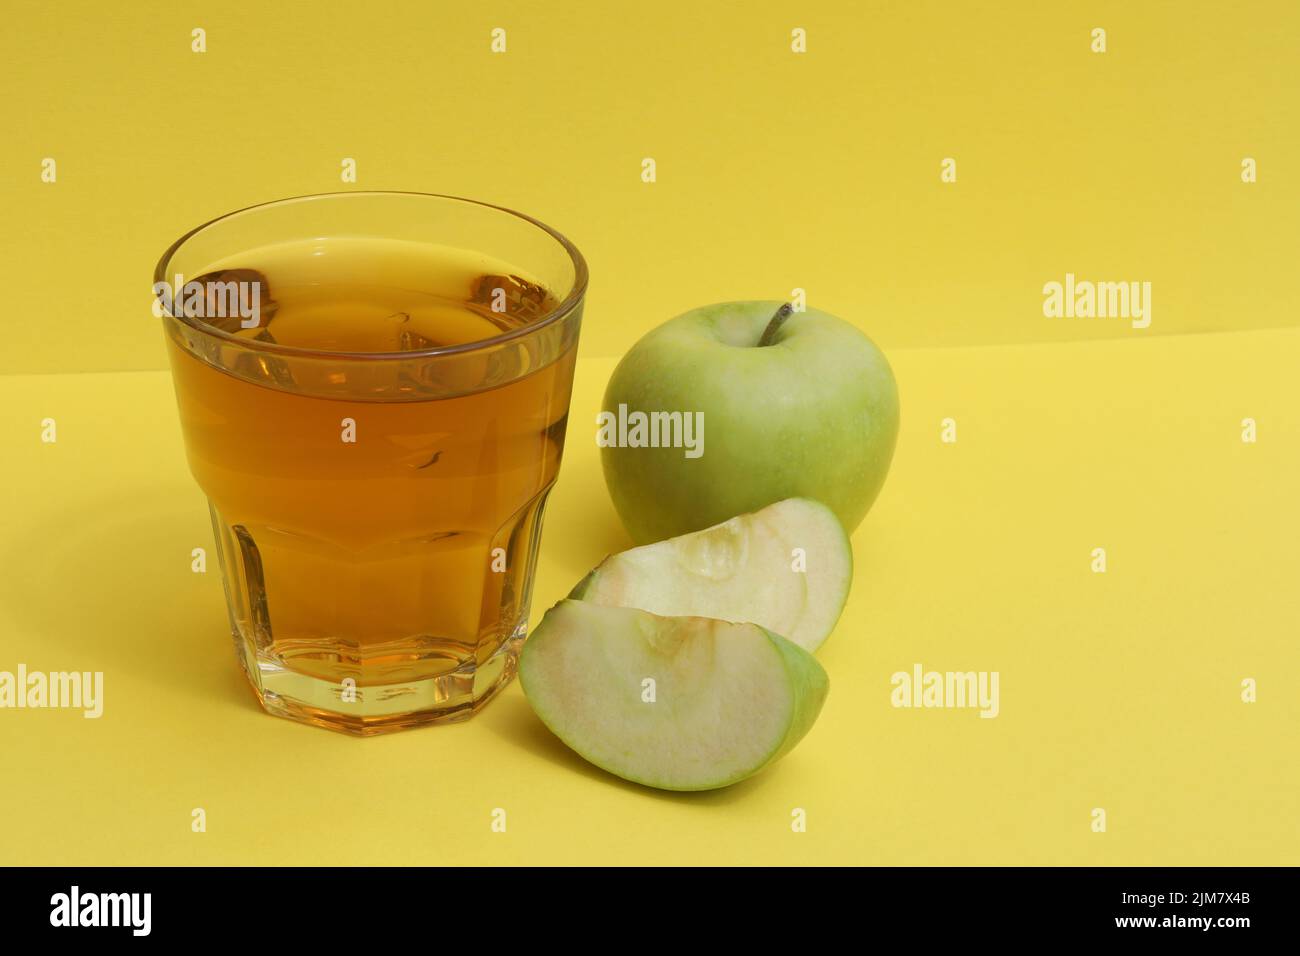 glass of apple juice and apple Stock Photo